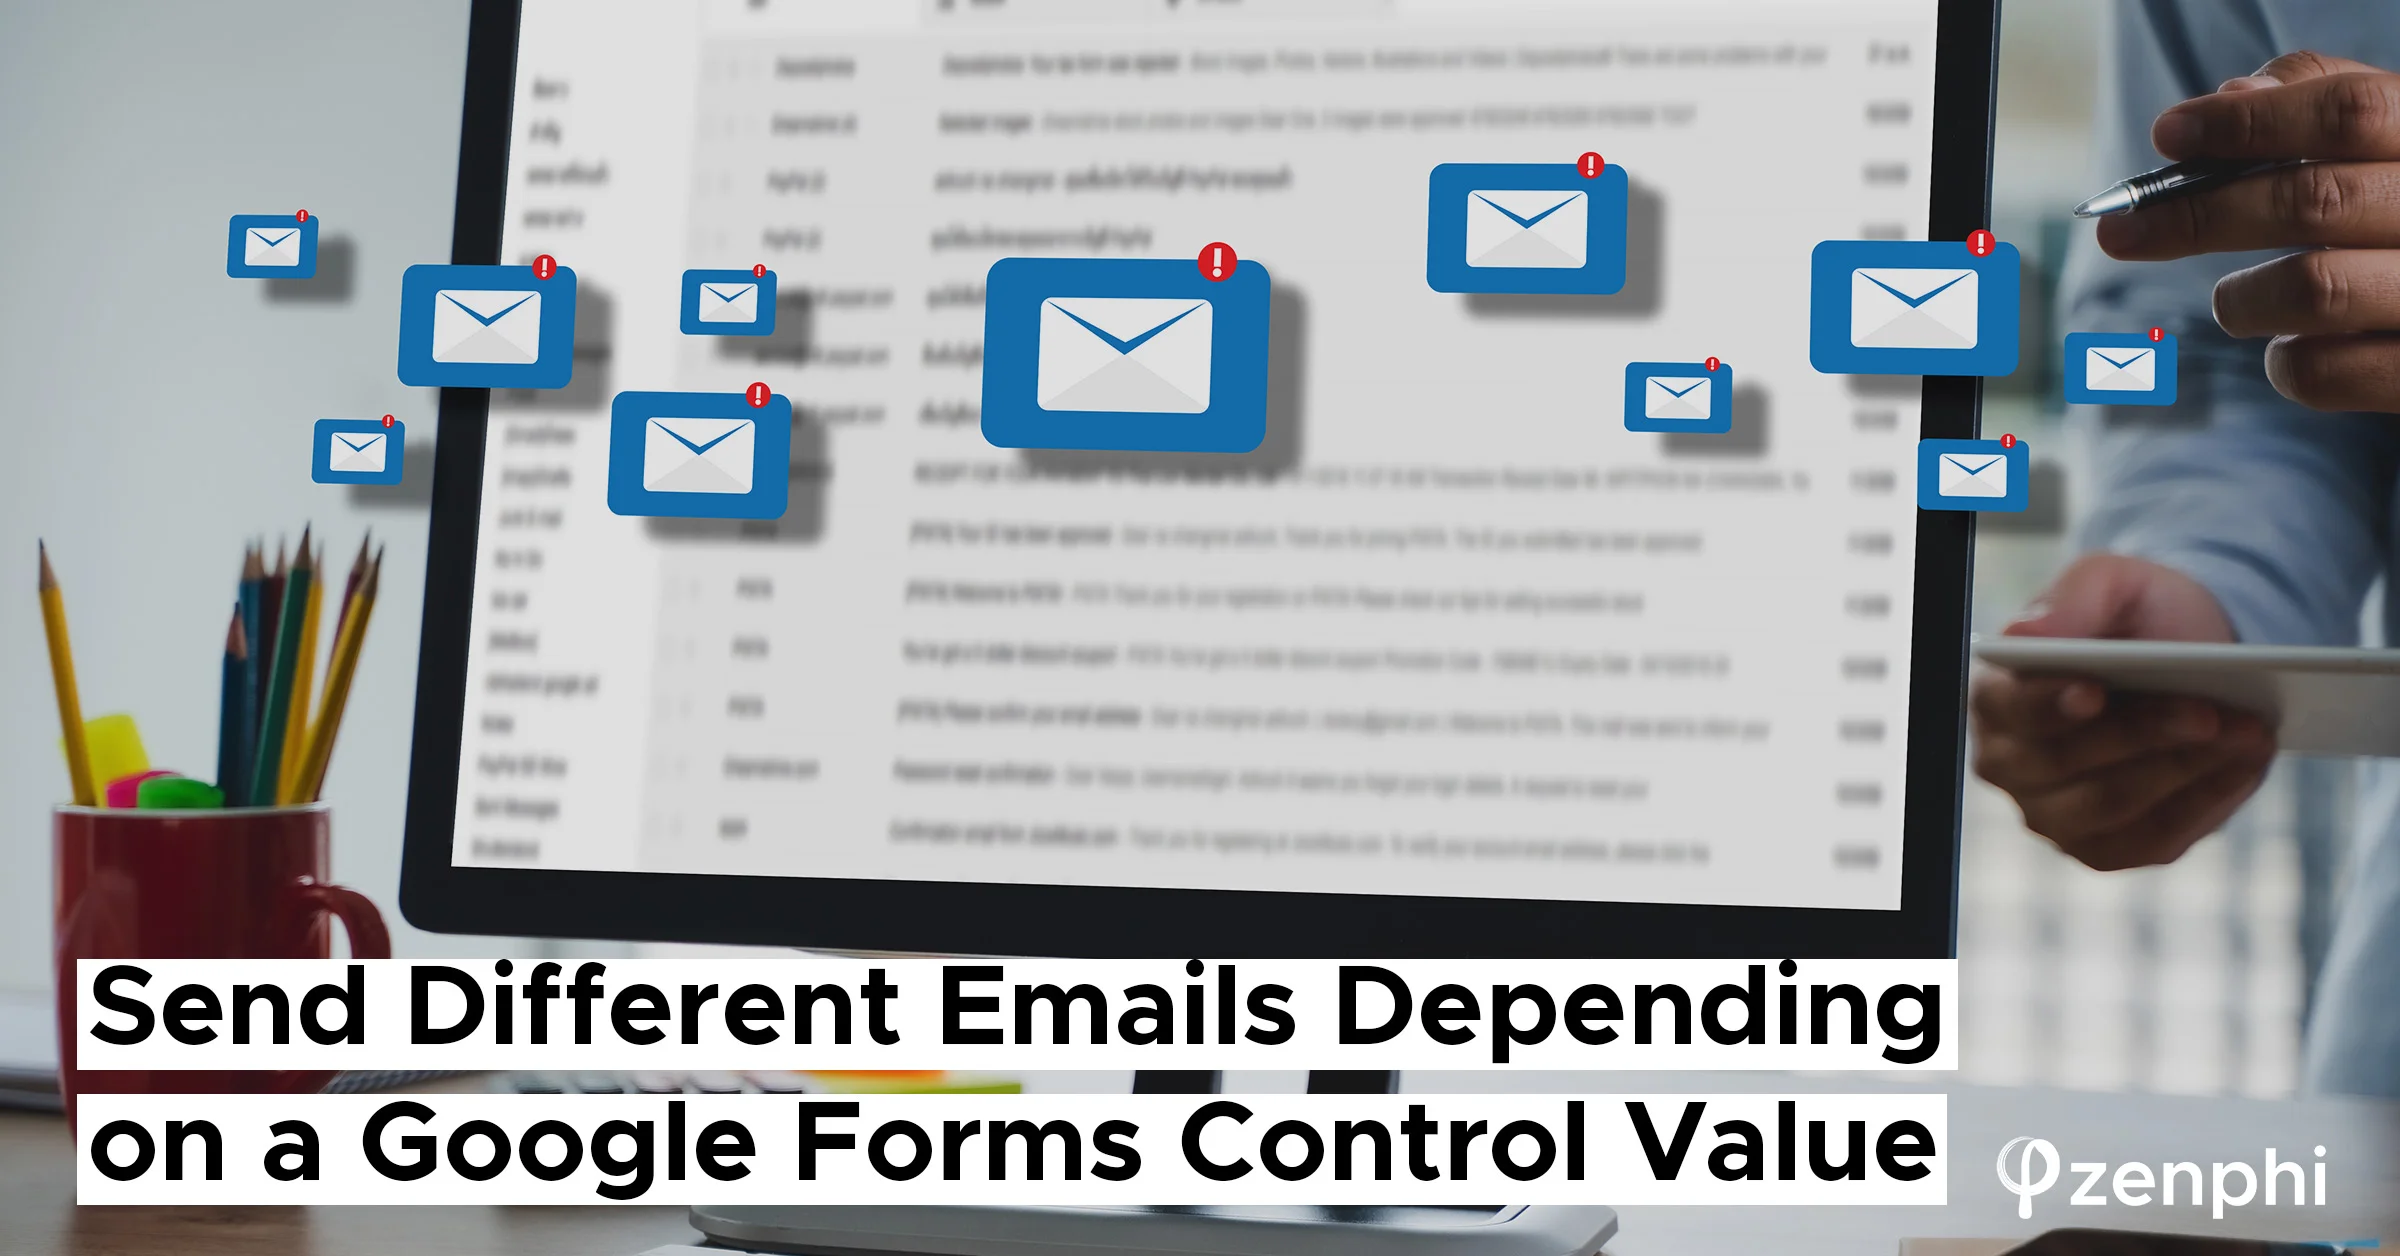 Send Different Emails Depending on a Google Forms Control Value